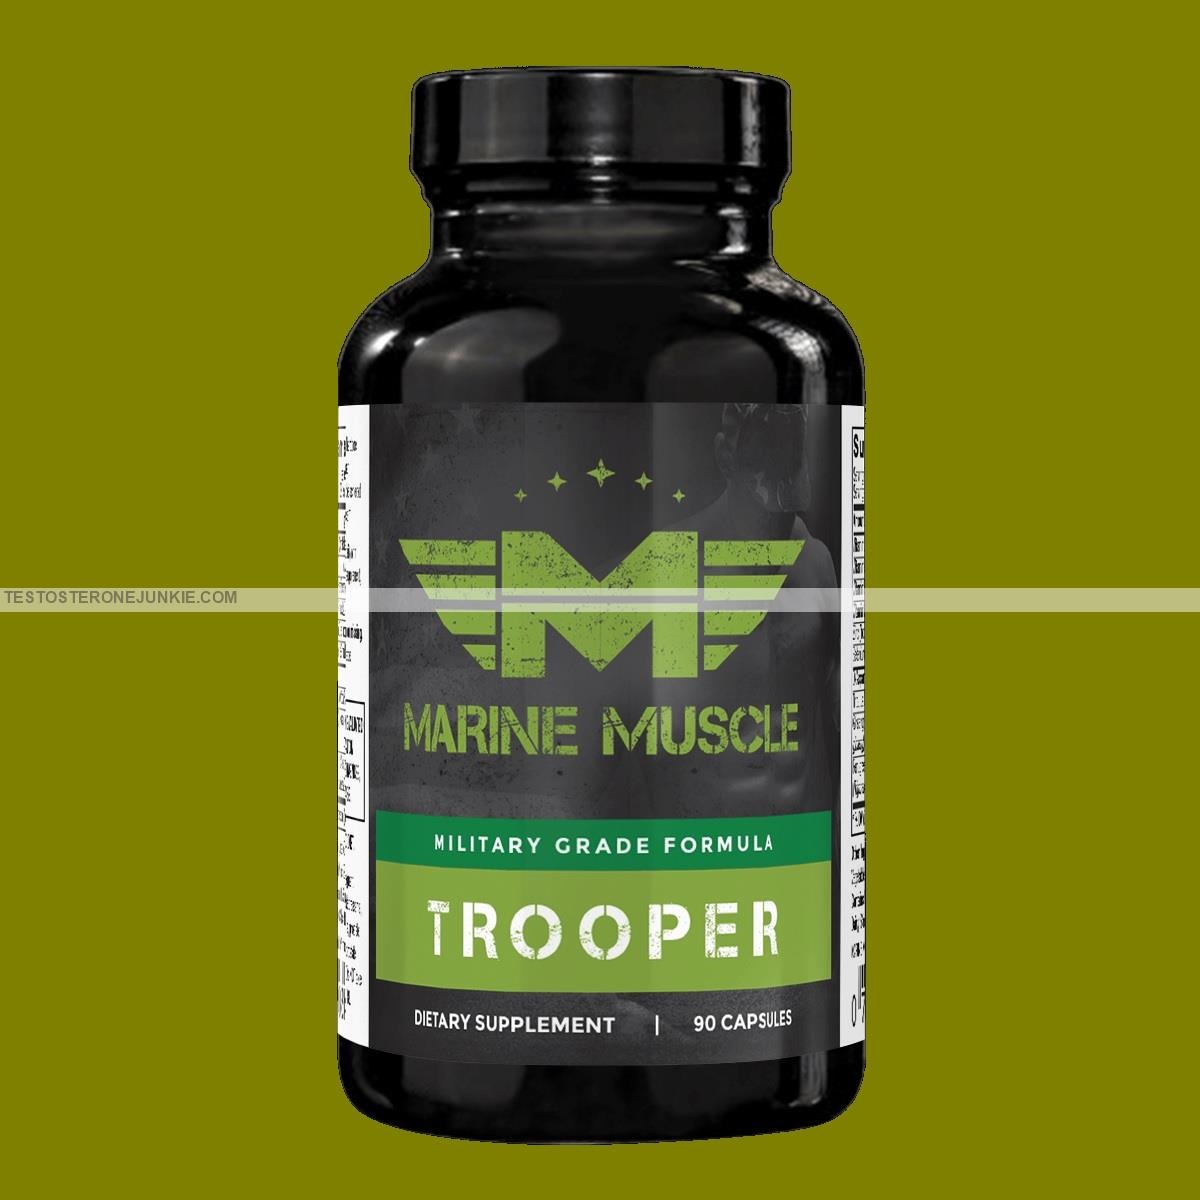 Wolfson Berg Marine Muscle Trooper Testosterone Booster Review